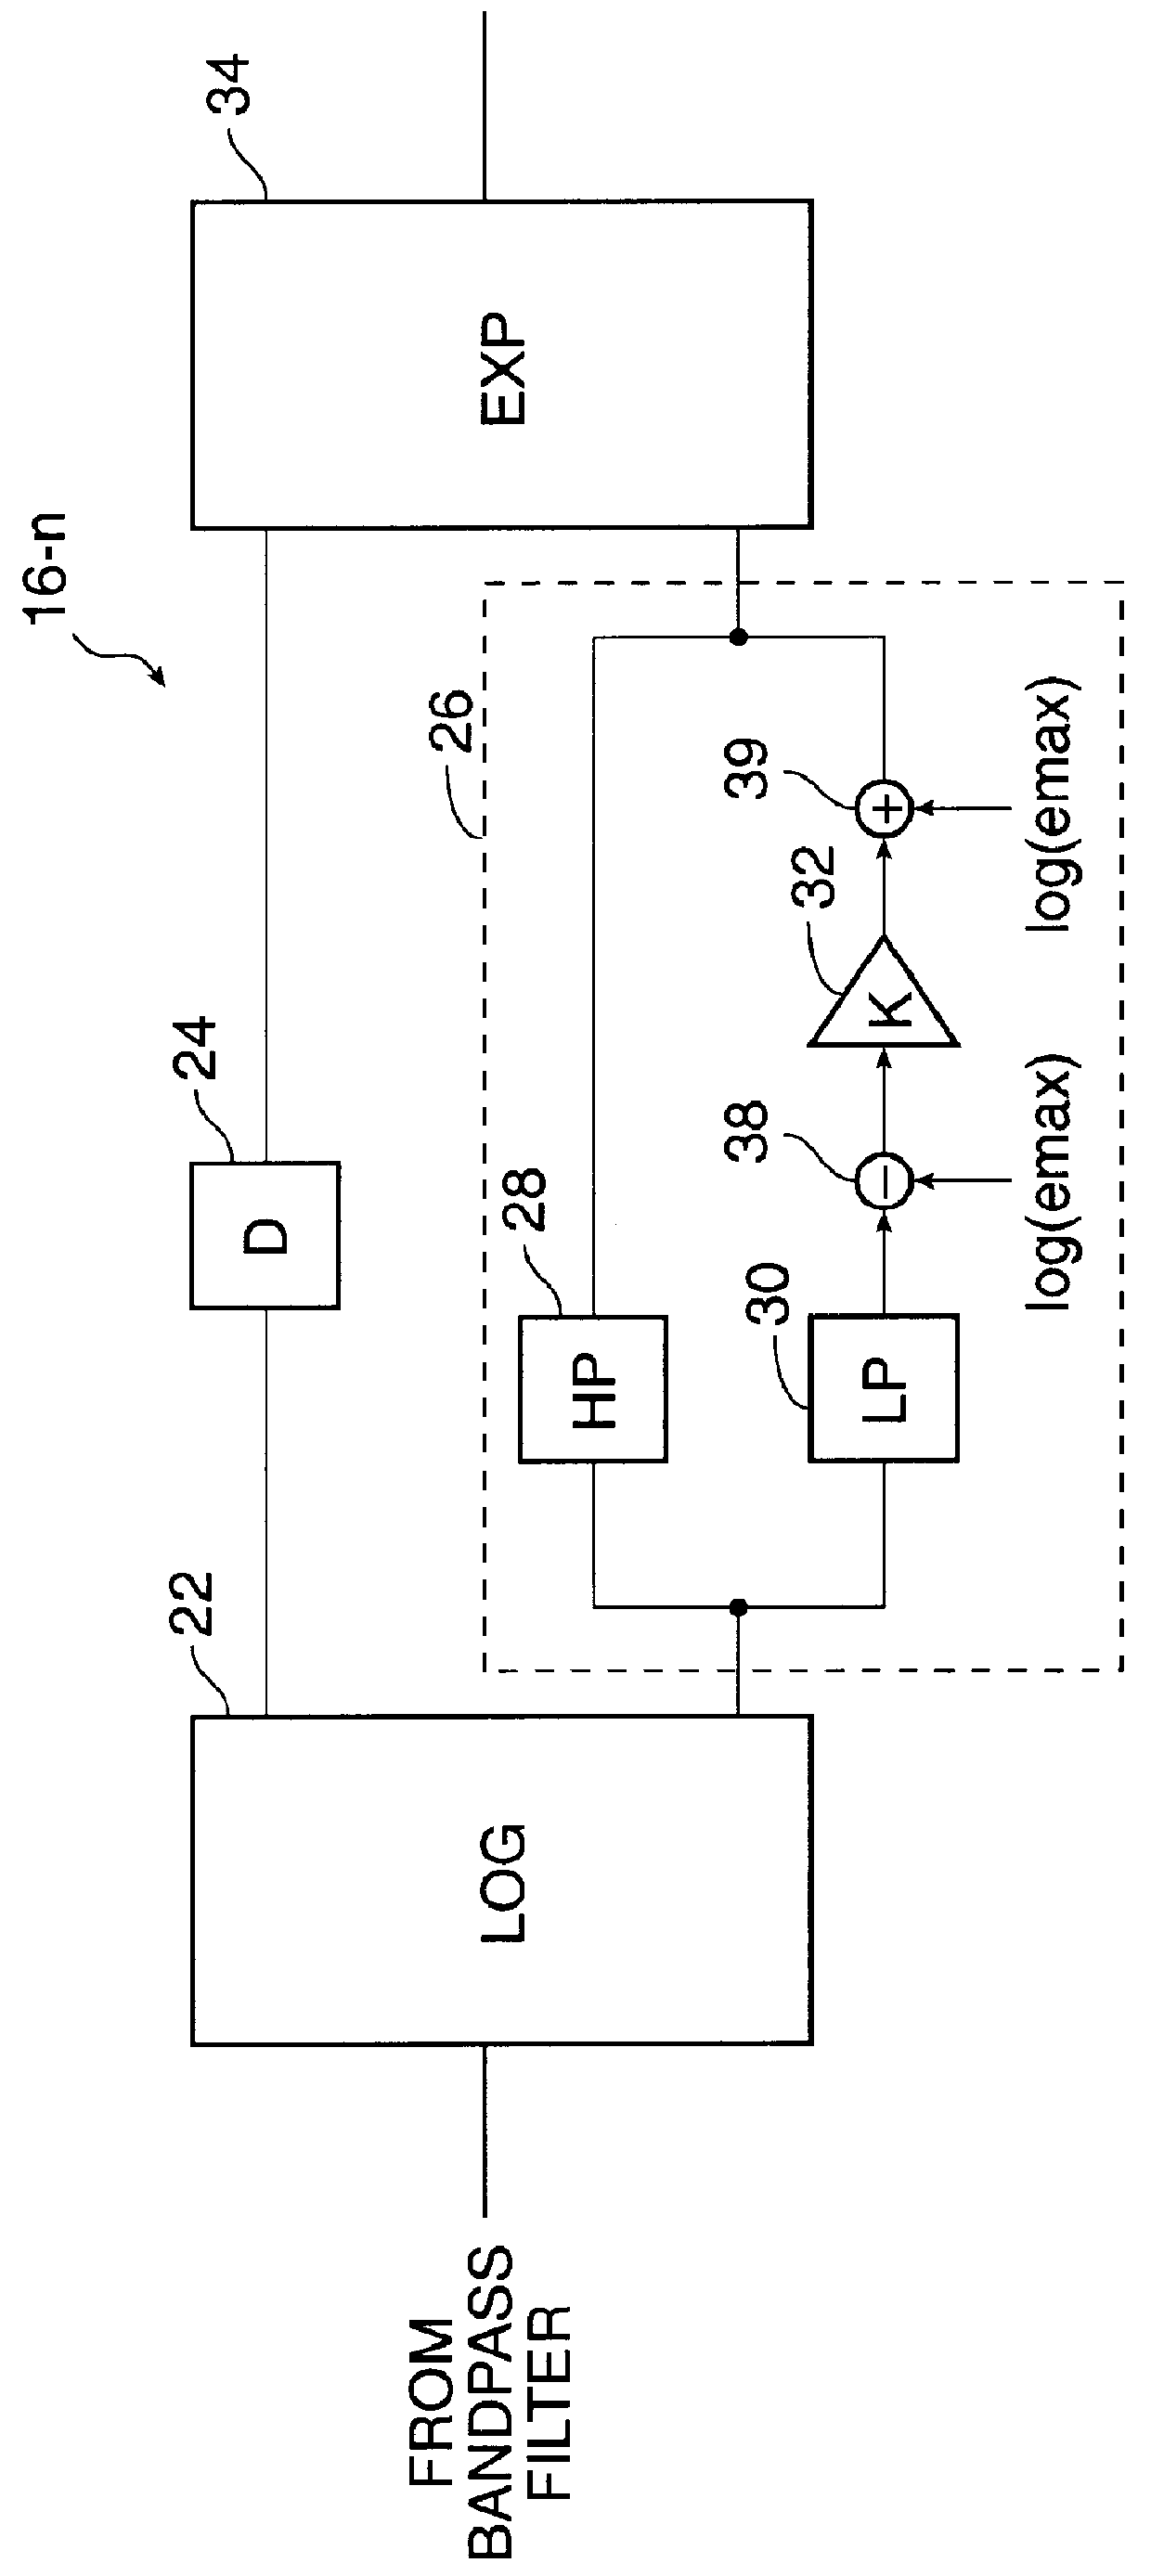 Hearing aid device incorporating signal processing techniques